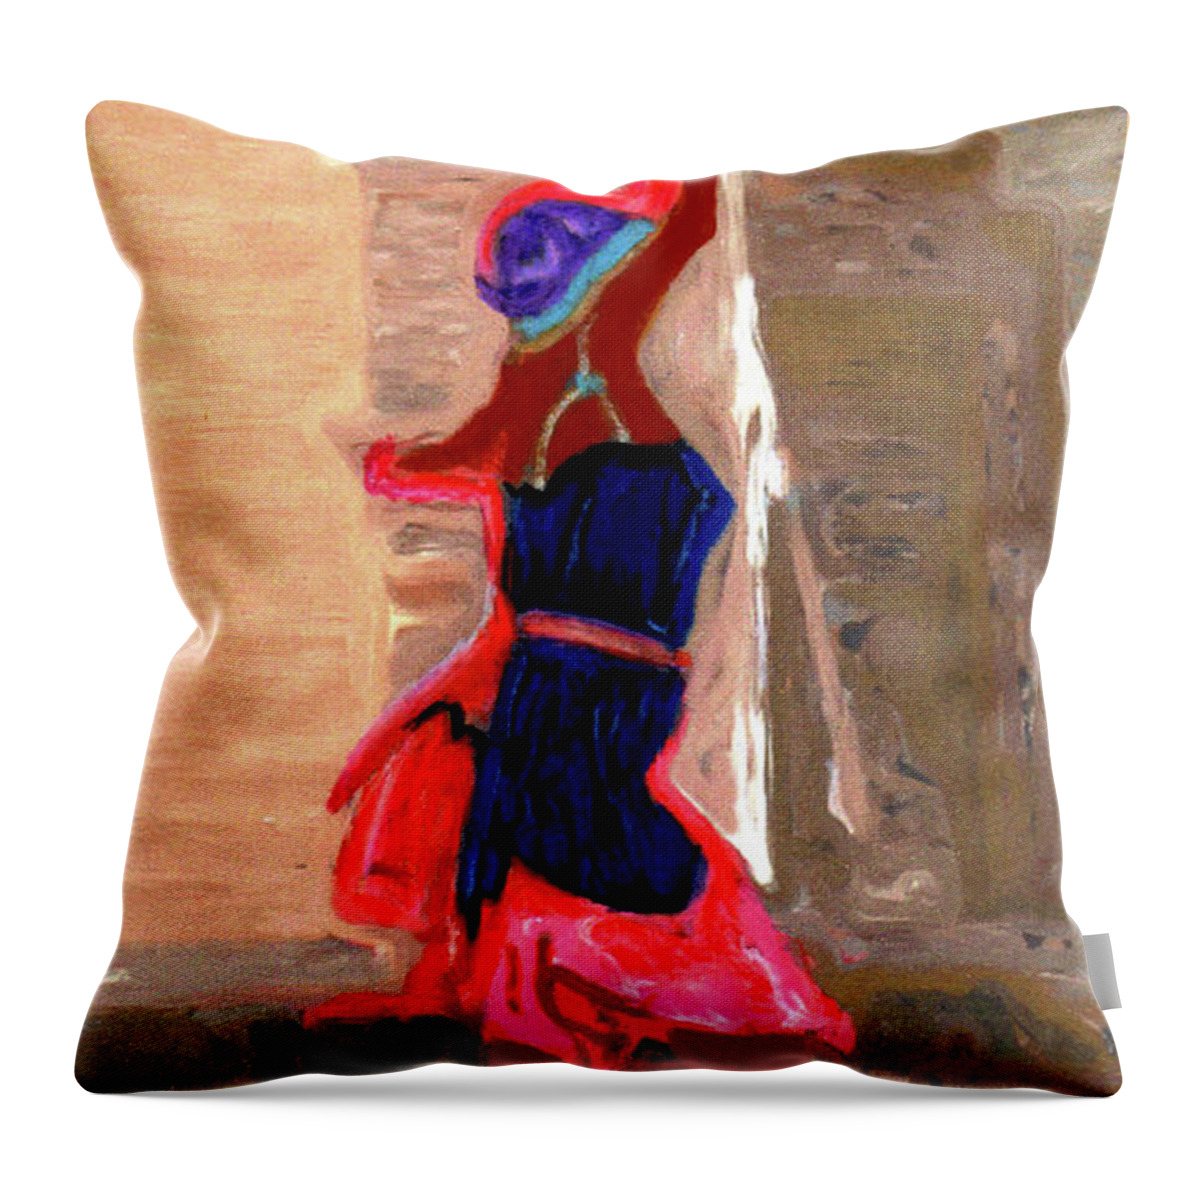 Red Scarf Dancers Throw Pillow featuring the digital art Red Scarf Dancer No. 4 by David Valentine